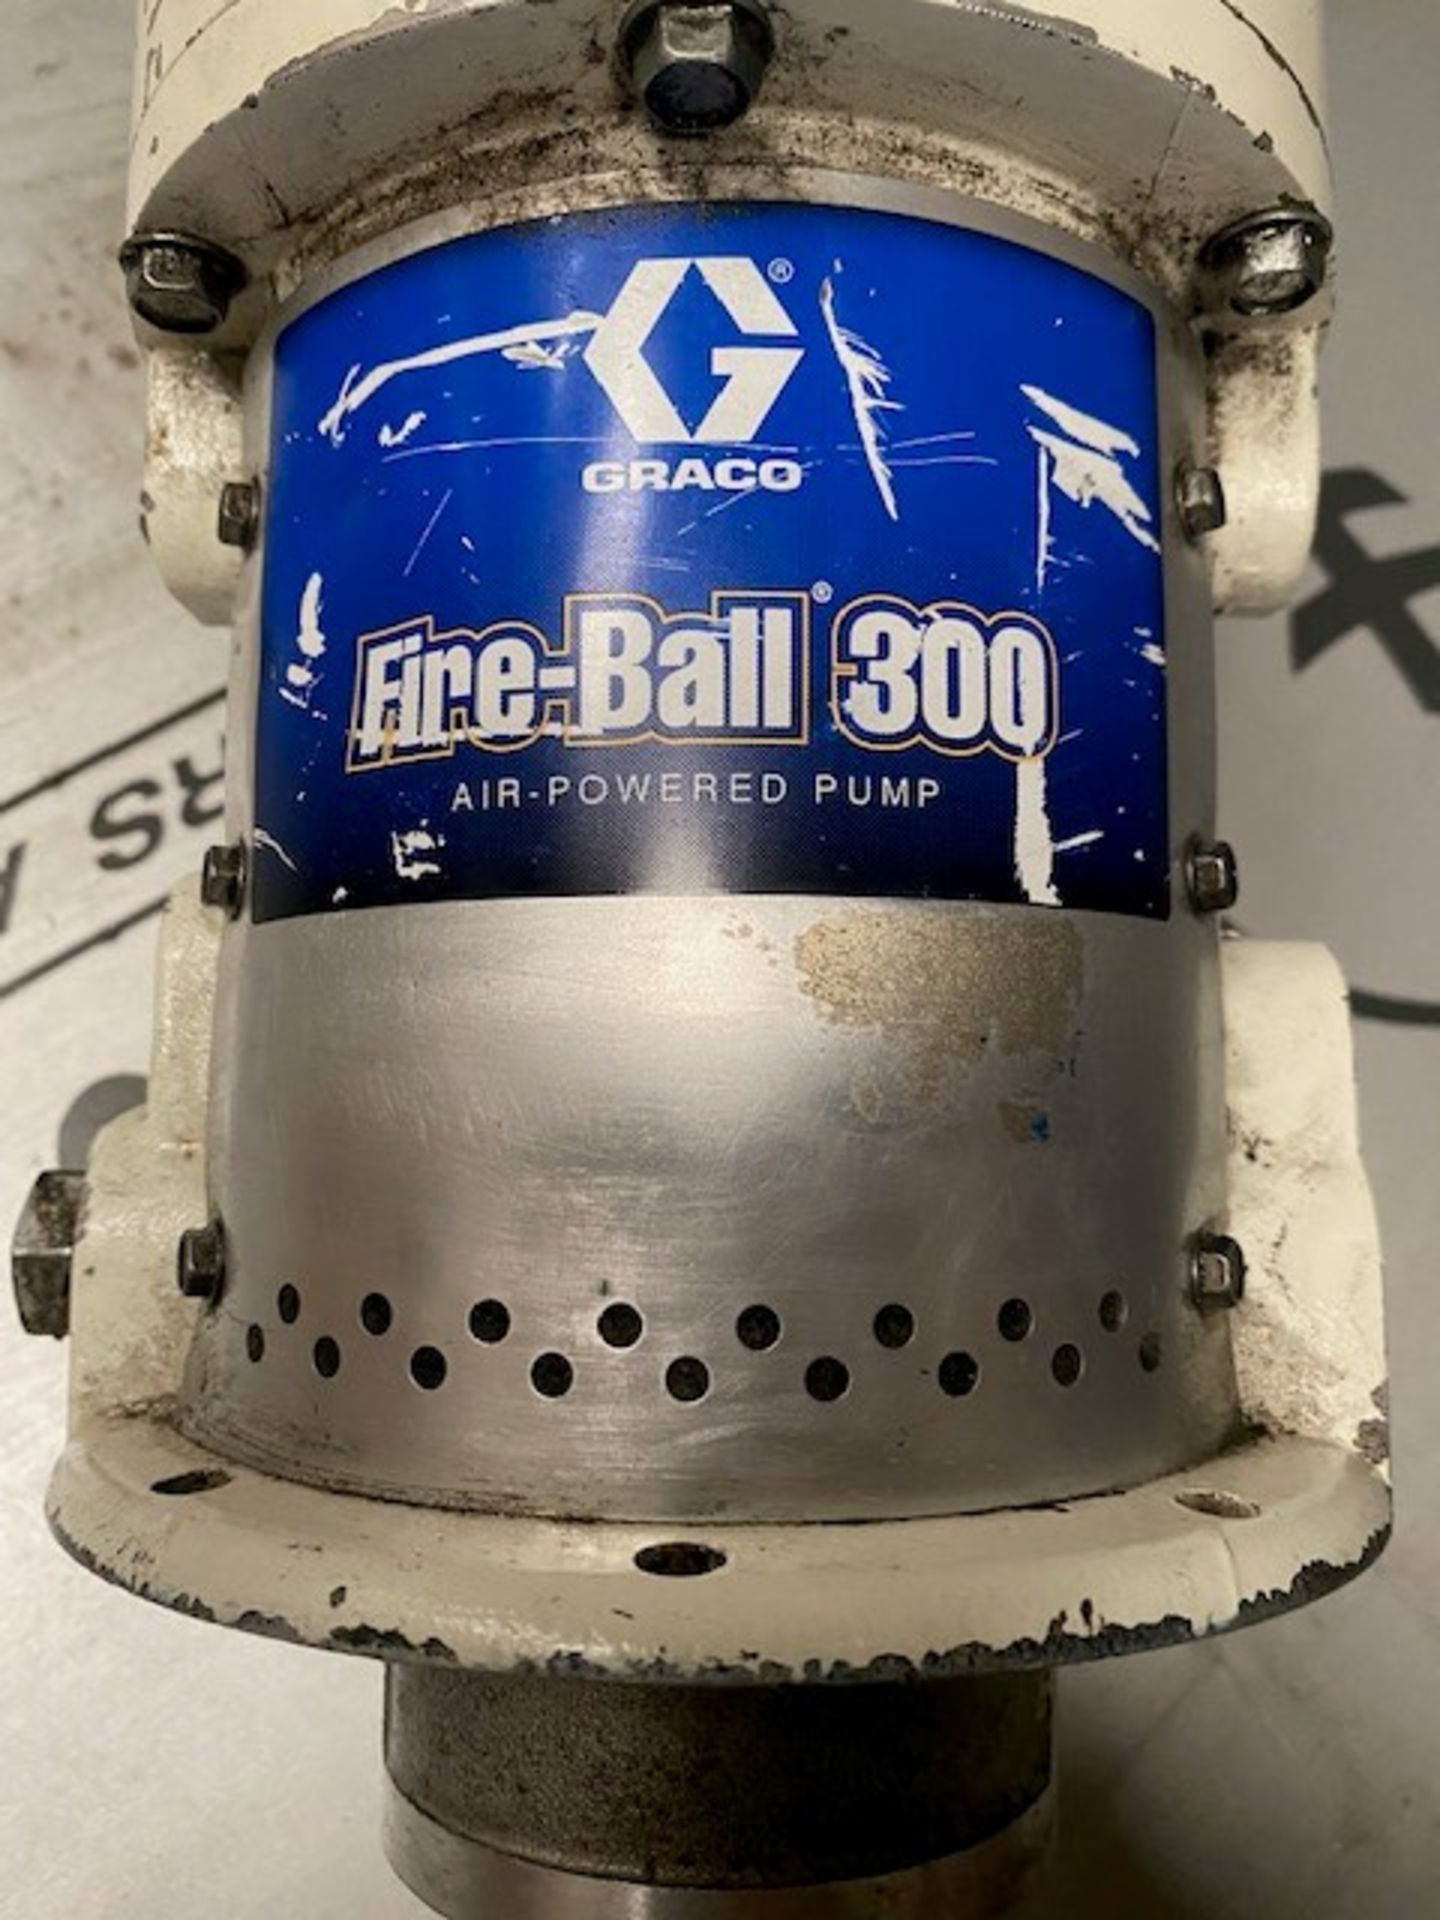 Graco Fireball 300 Air Powered Pump, loading free of charge - yes, lot location - Bradford, West - Image 2 of 4